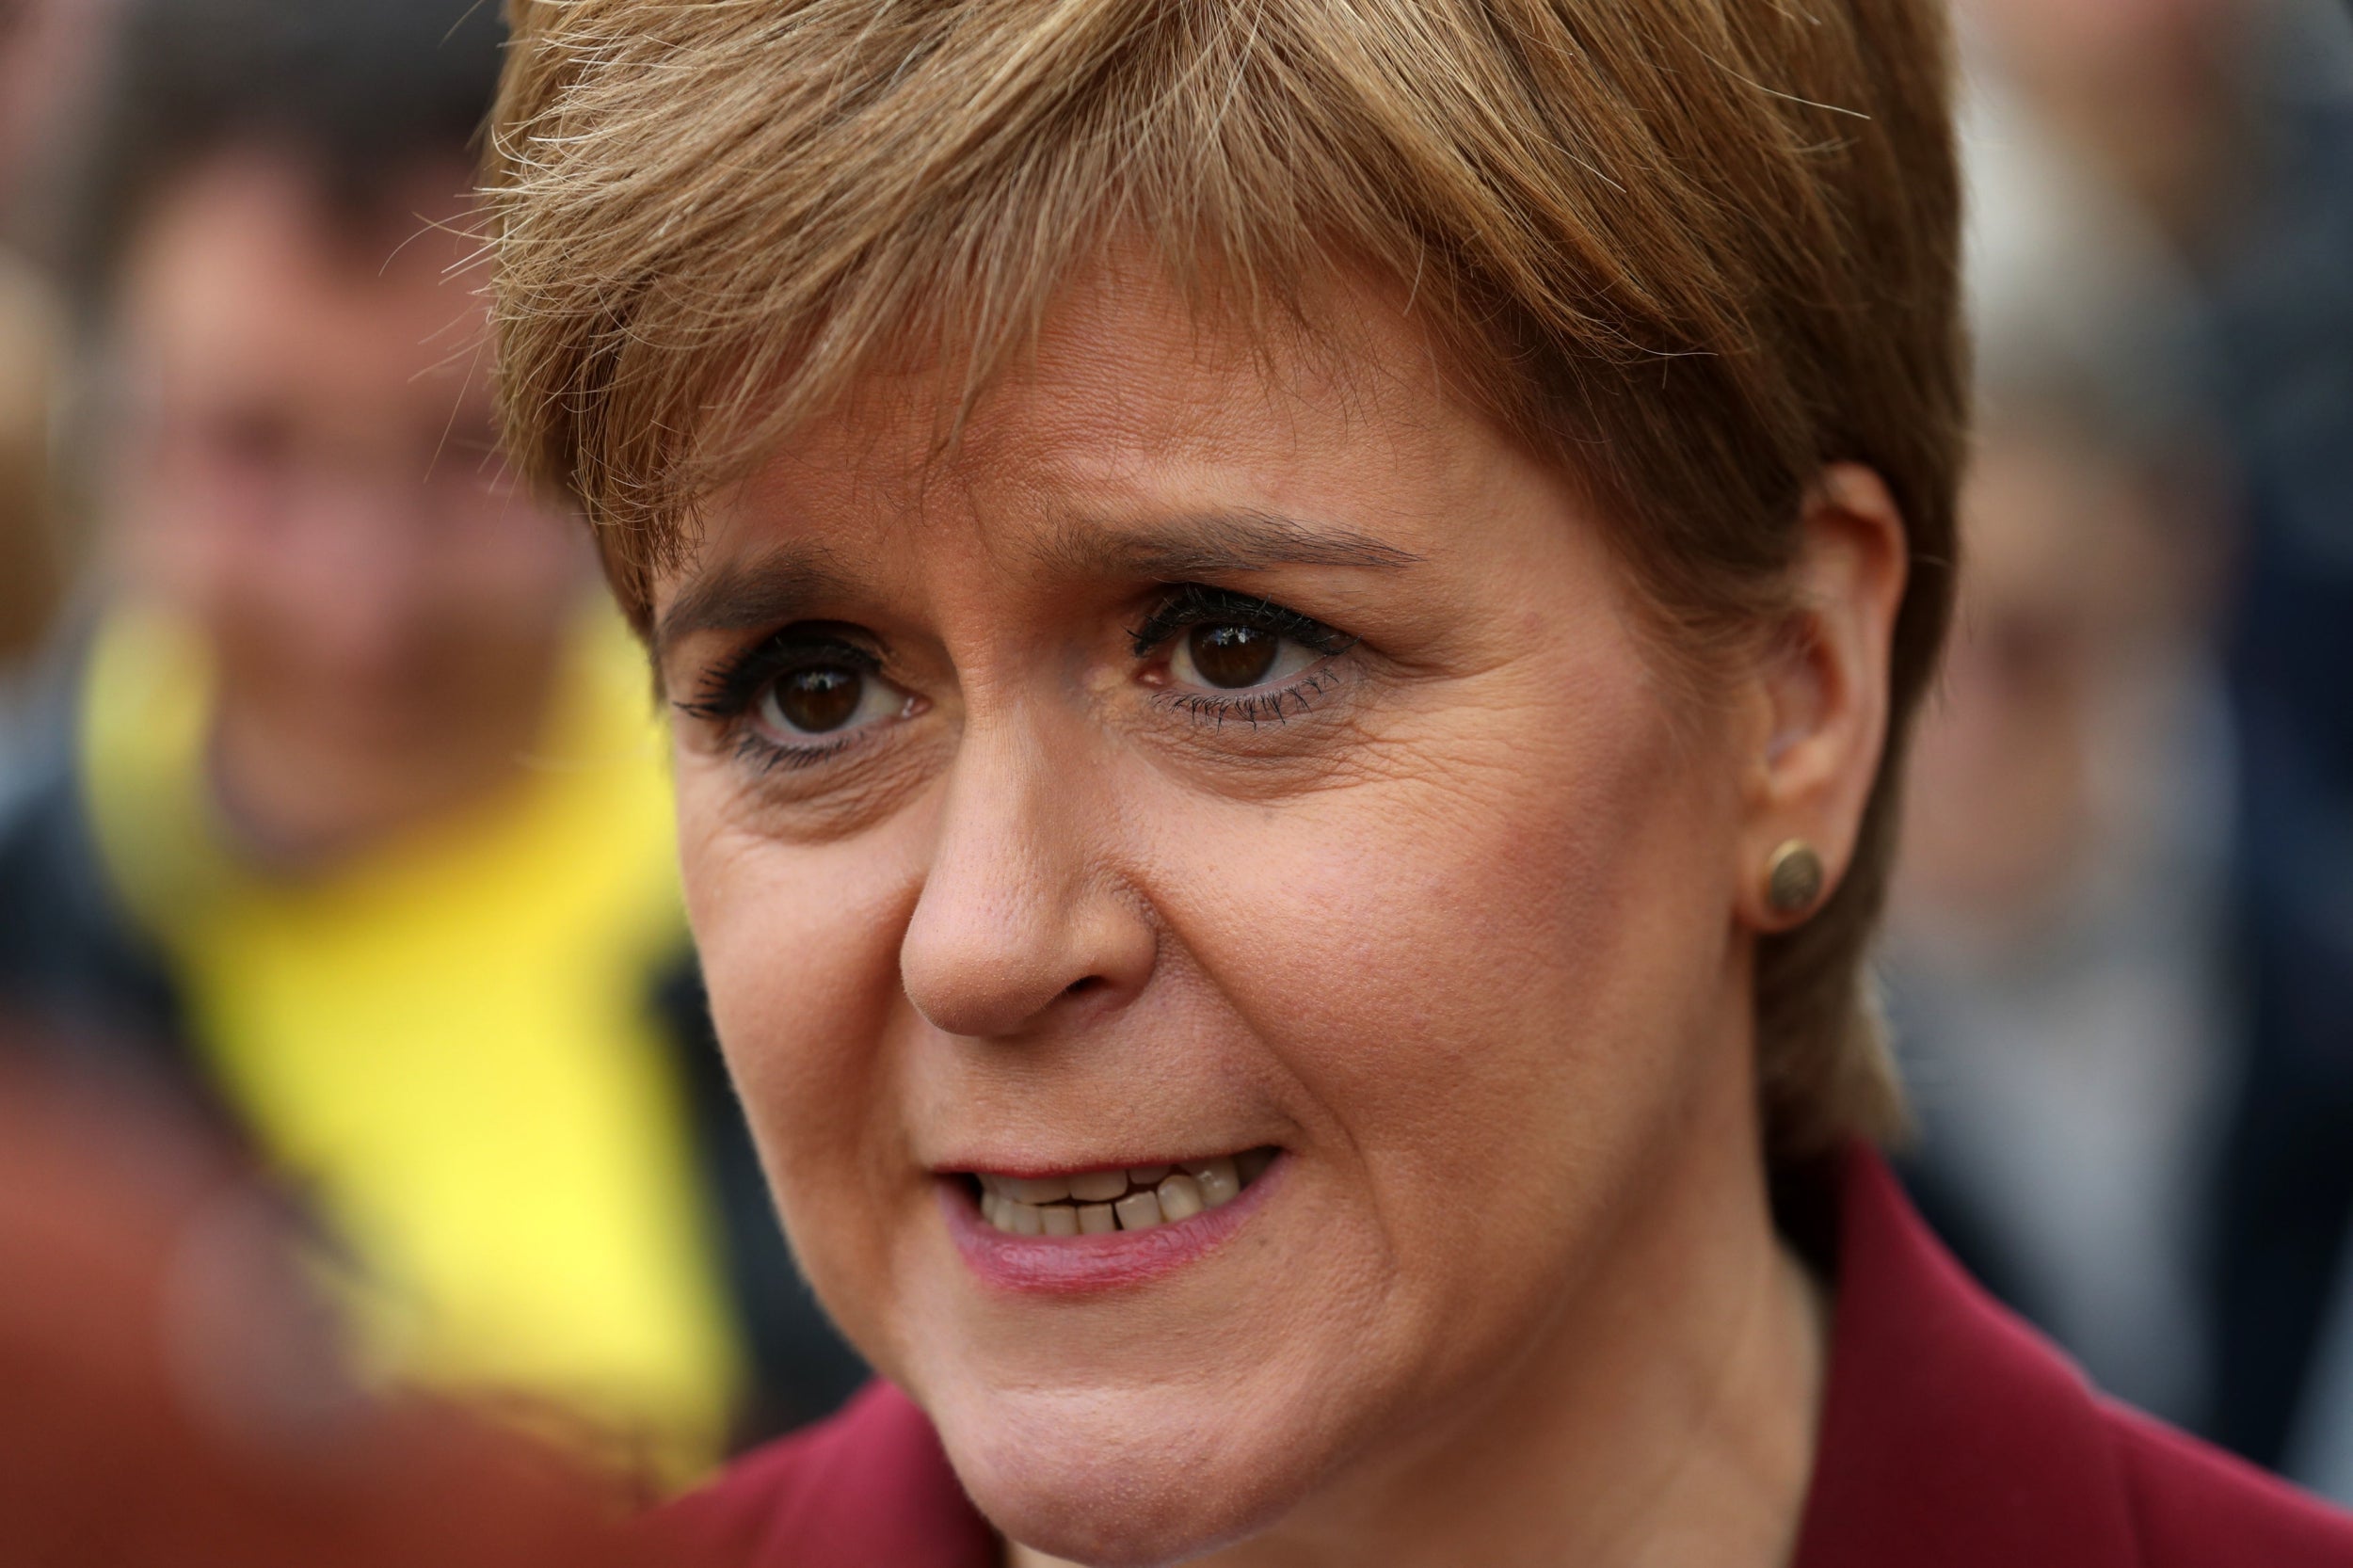 ‘A vote for the SNP is a vote to escape Brexit, and to put Scotland’s future in Scotland’s hands,’ Sturgeon says